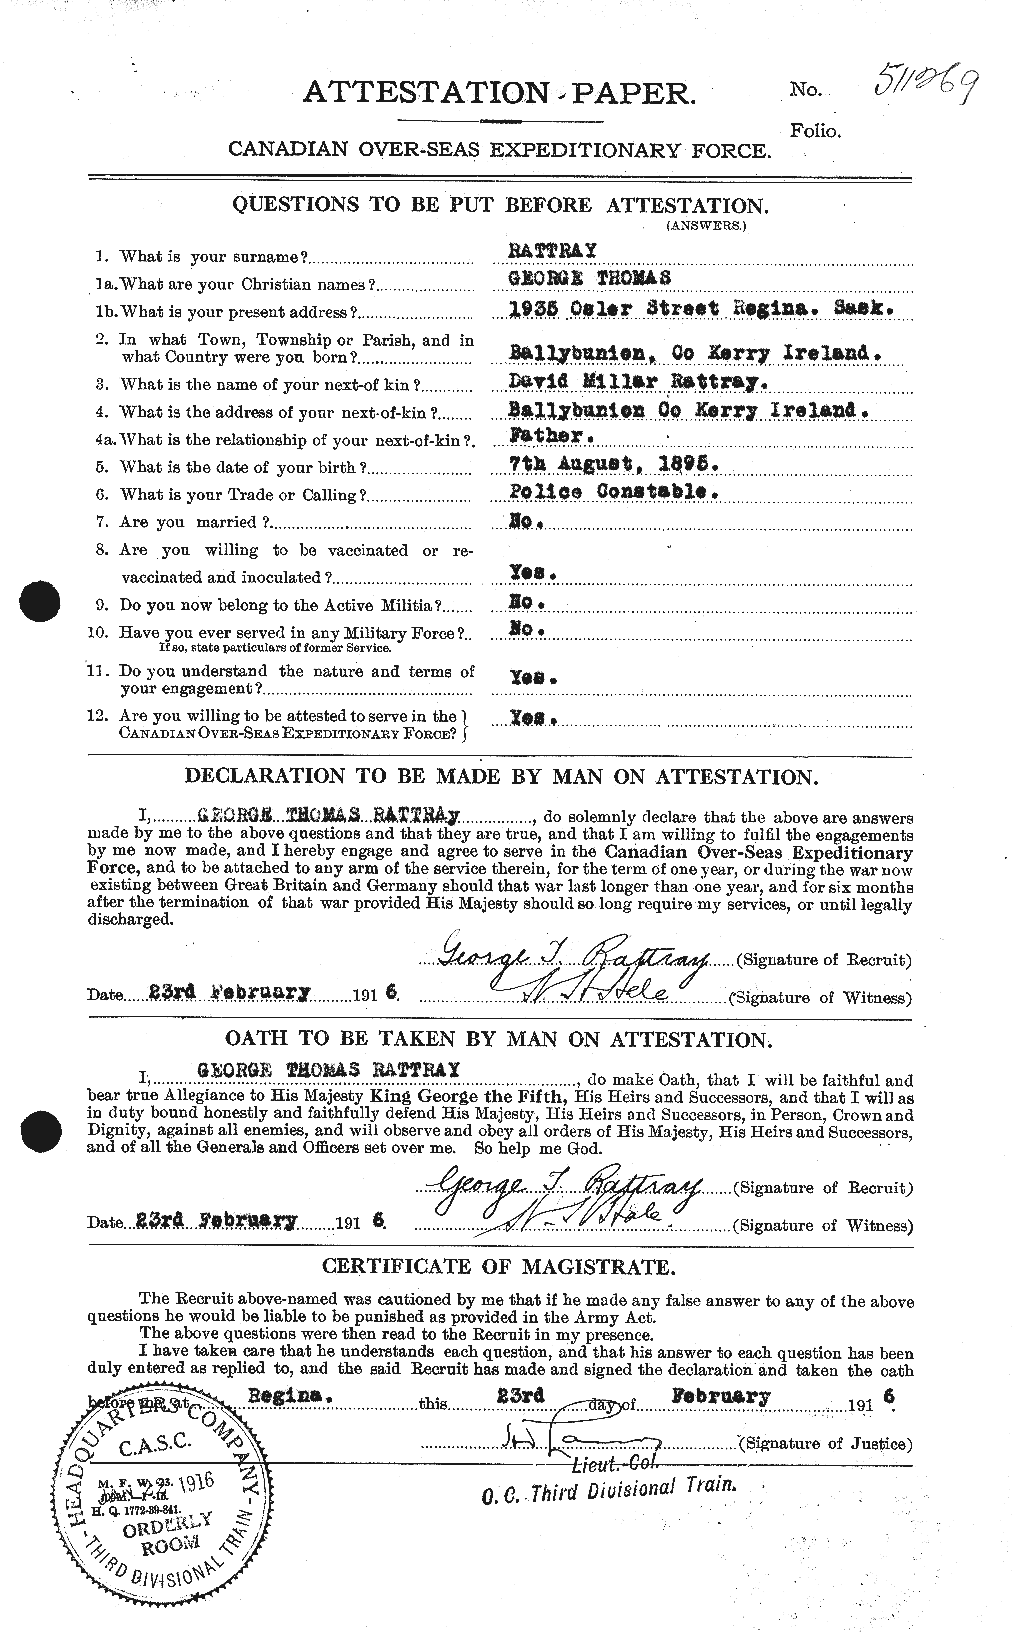 Personnel Records of the First World War - CEF 595697a